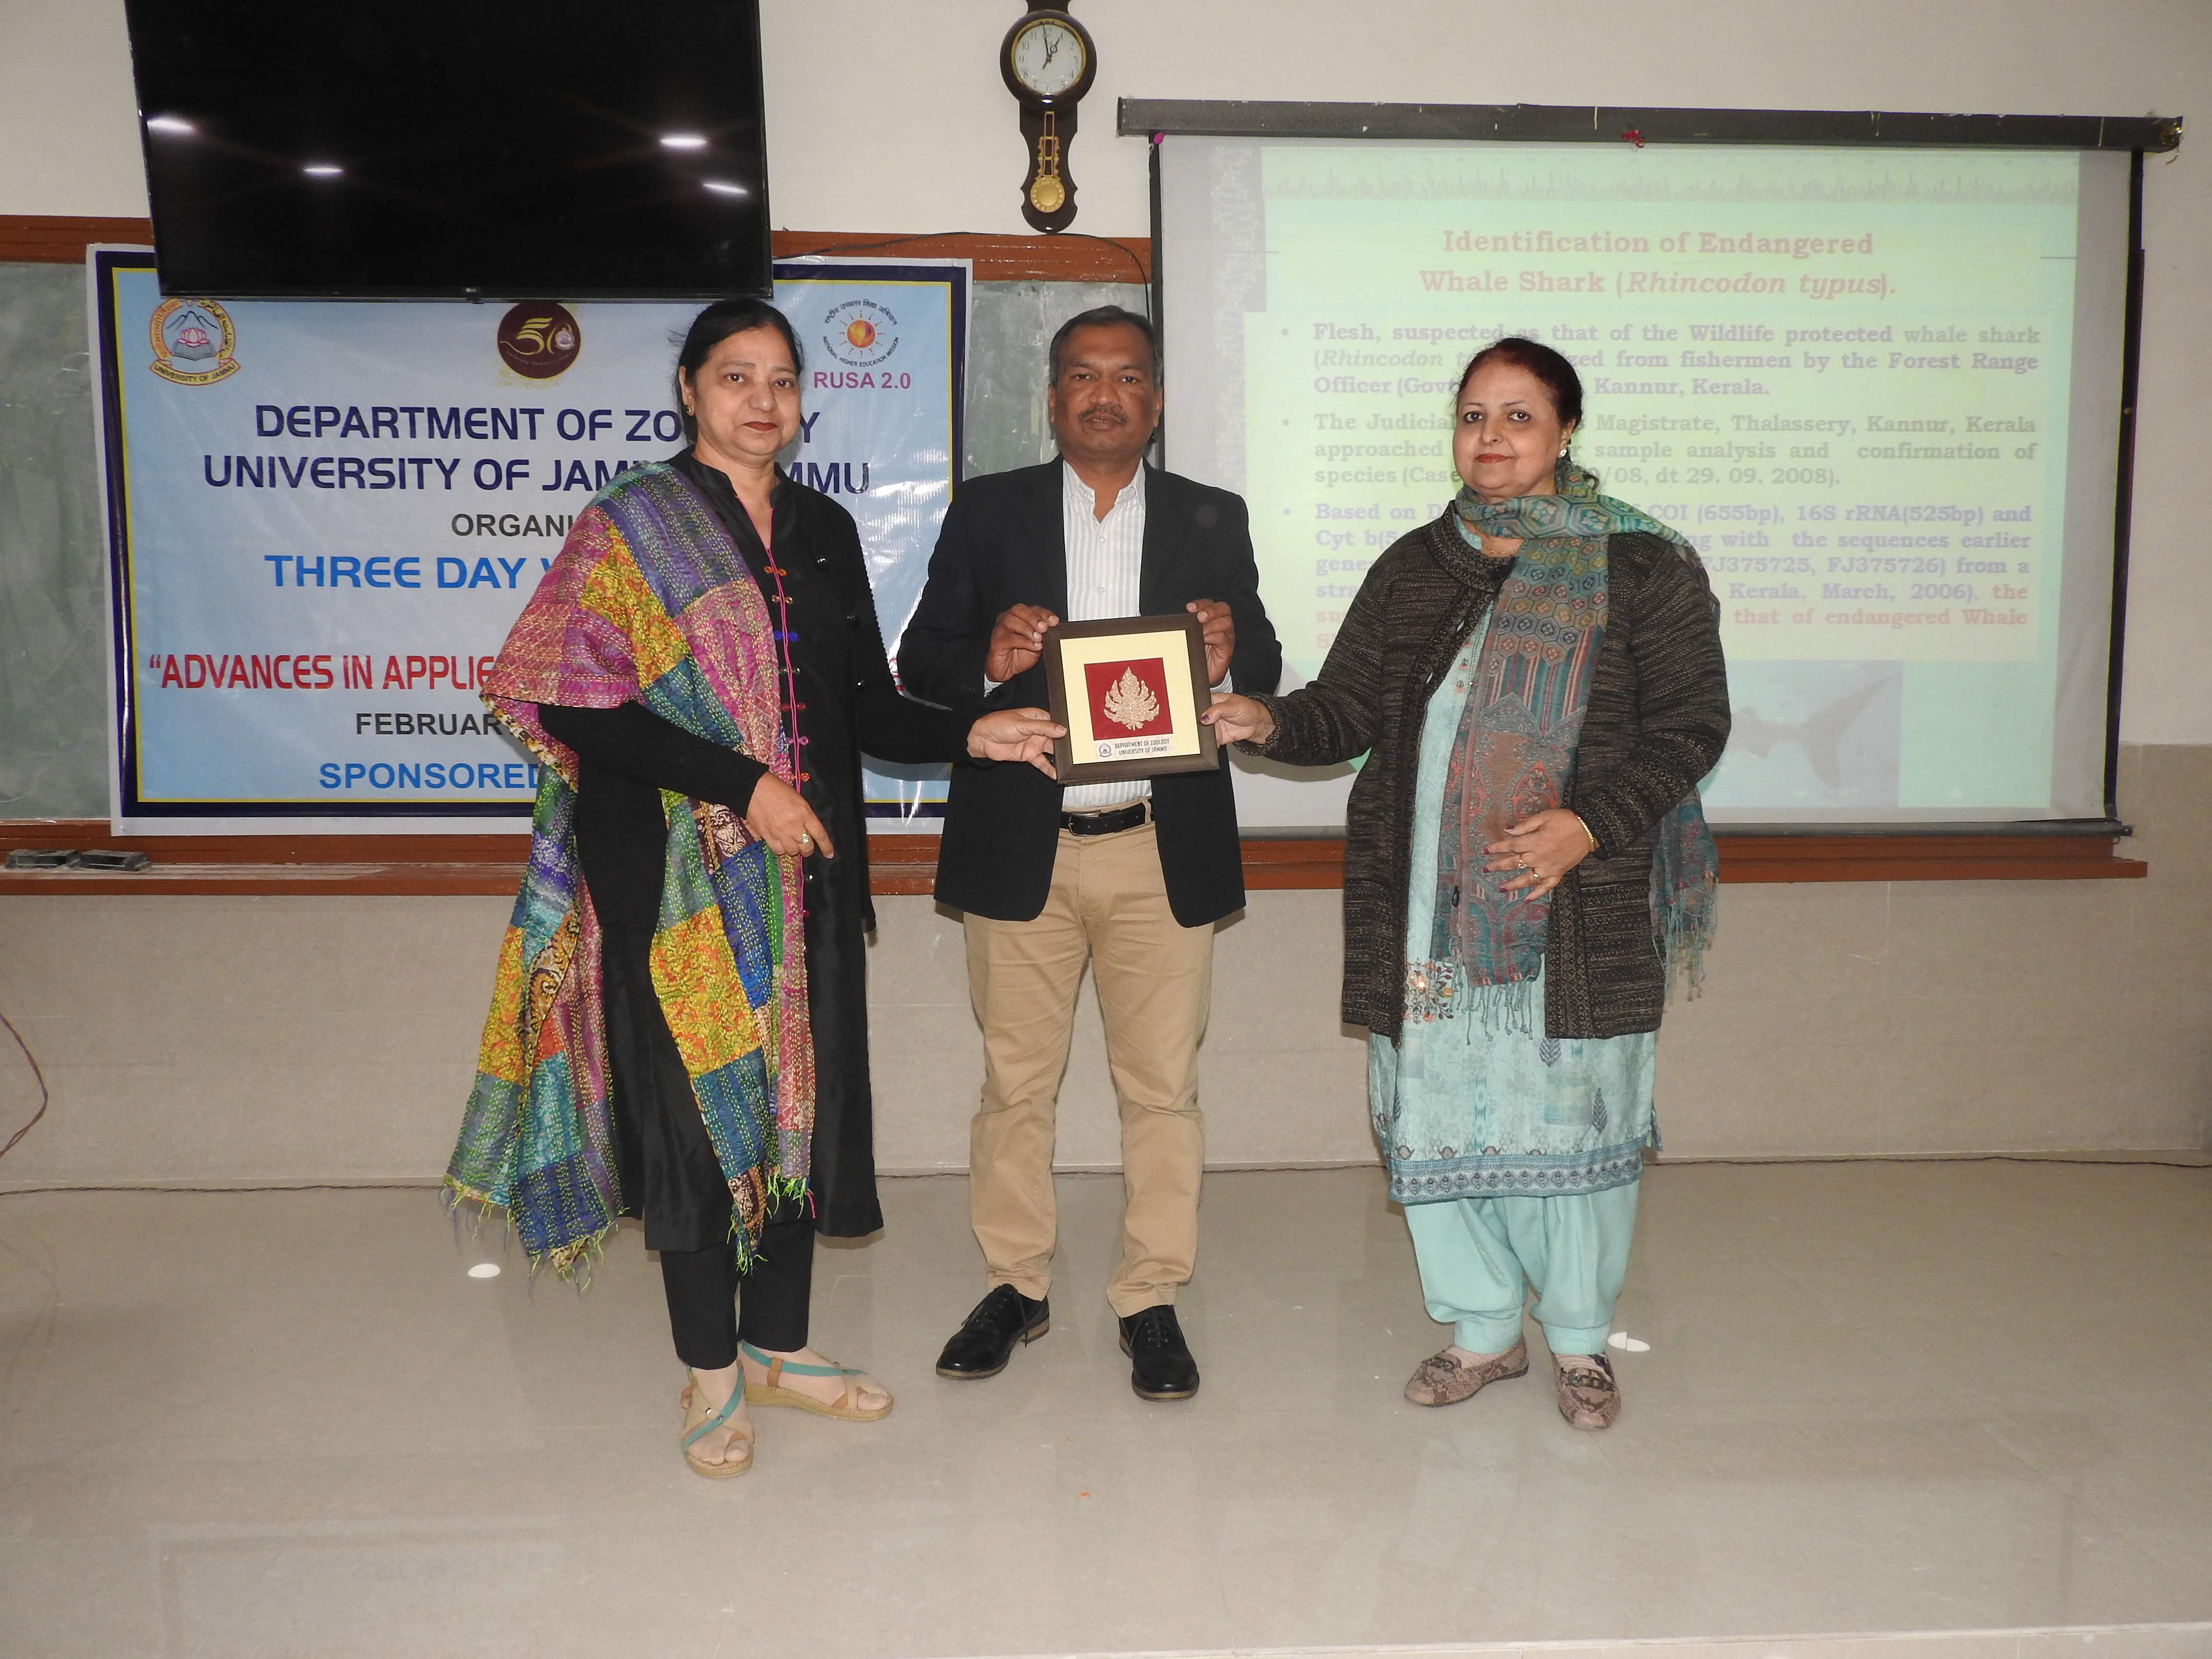 The Department of Zoology, the University of Jammu organized a three-day workshop on "Advances in Zoological Techniques" on 18th-20th February 2020.